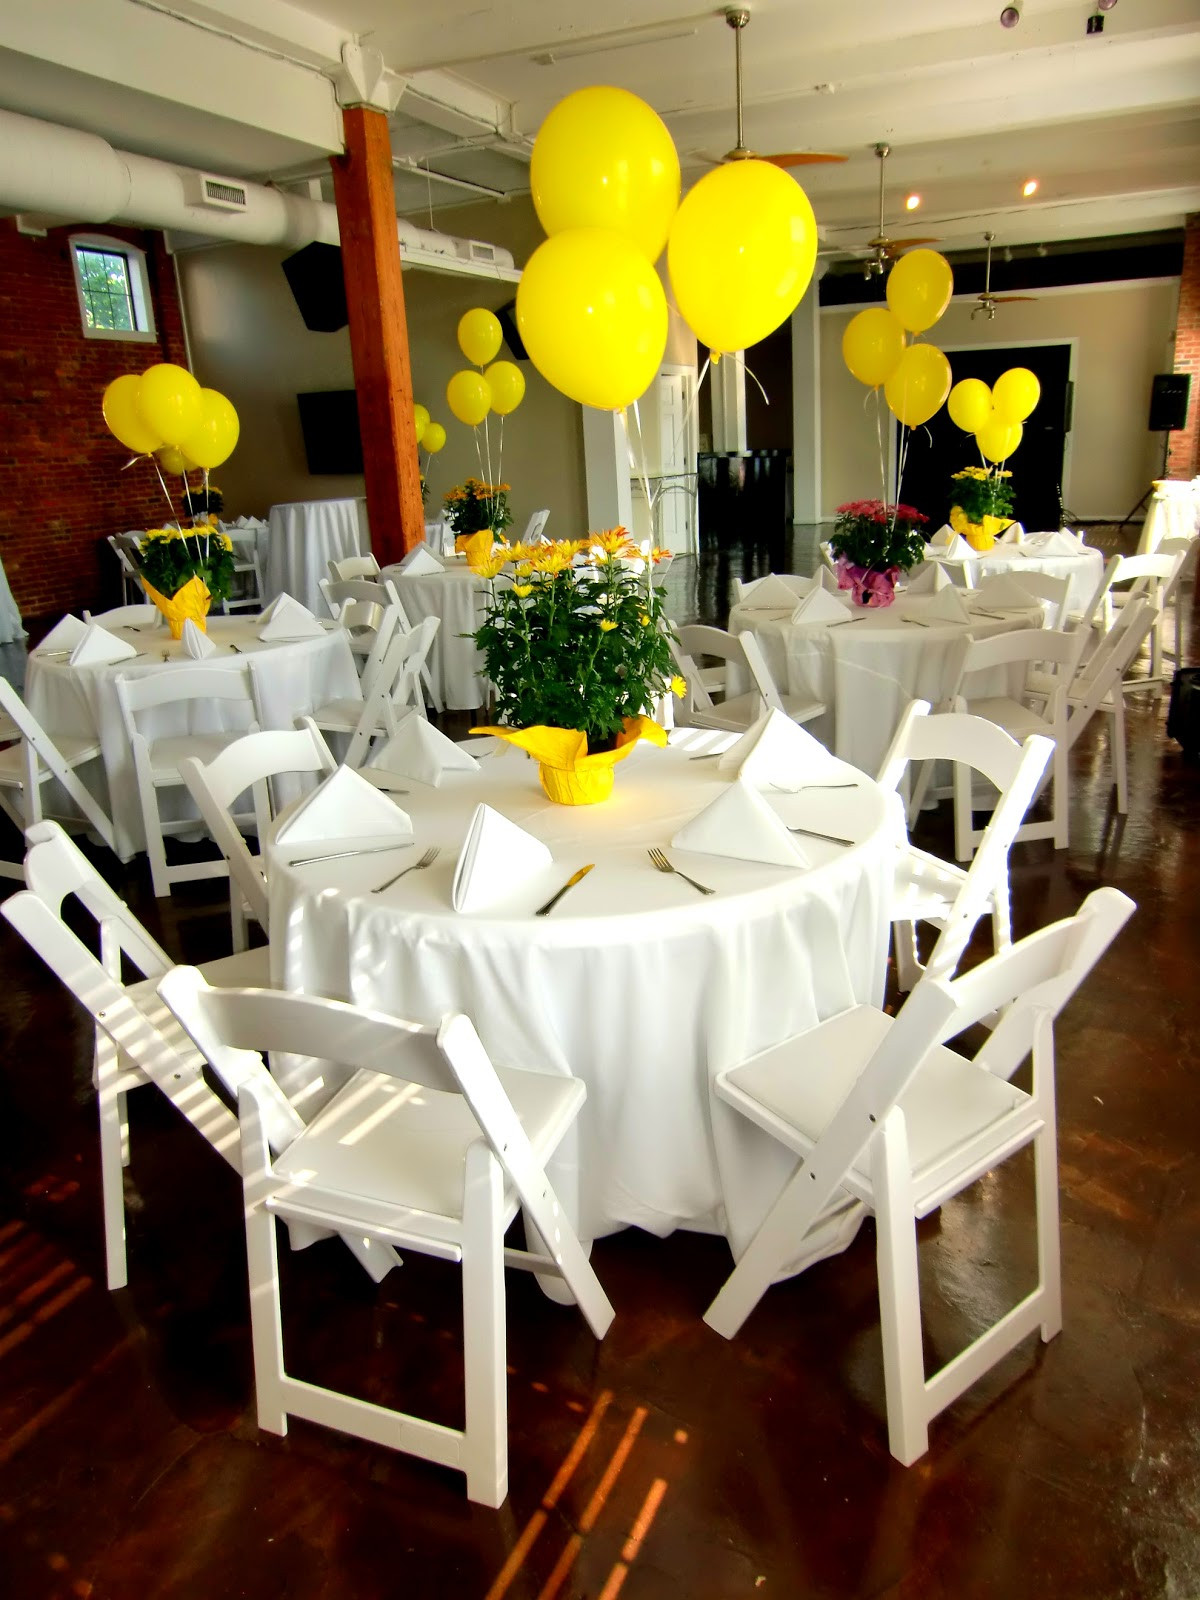 Ideas For A 60th Birthday Party
 Surprise 60th Birthday Party in July RSVP The RiverRoom